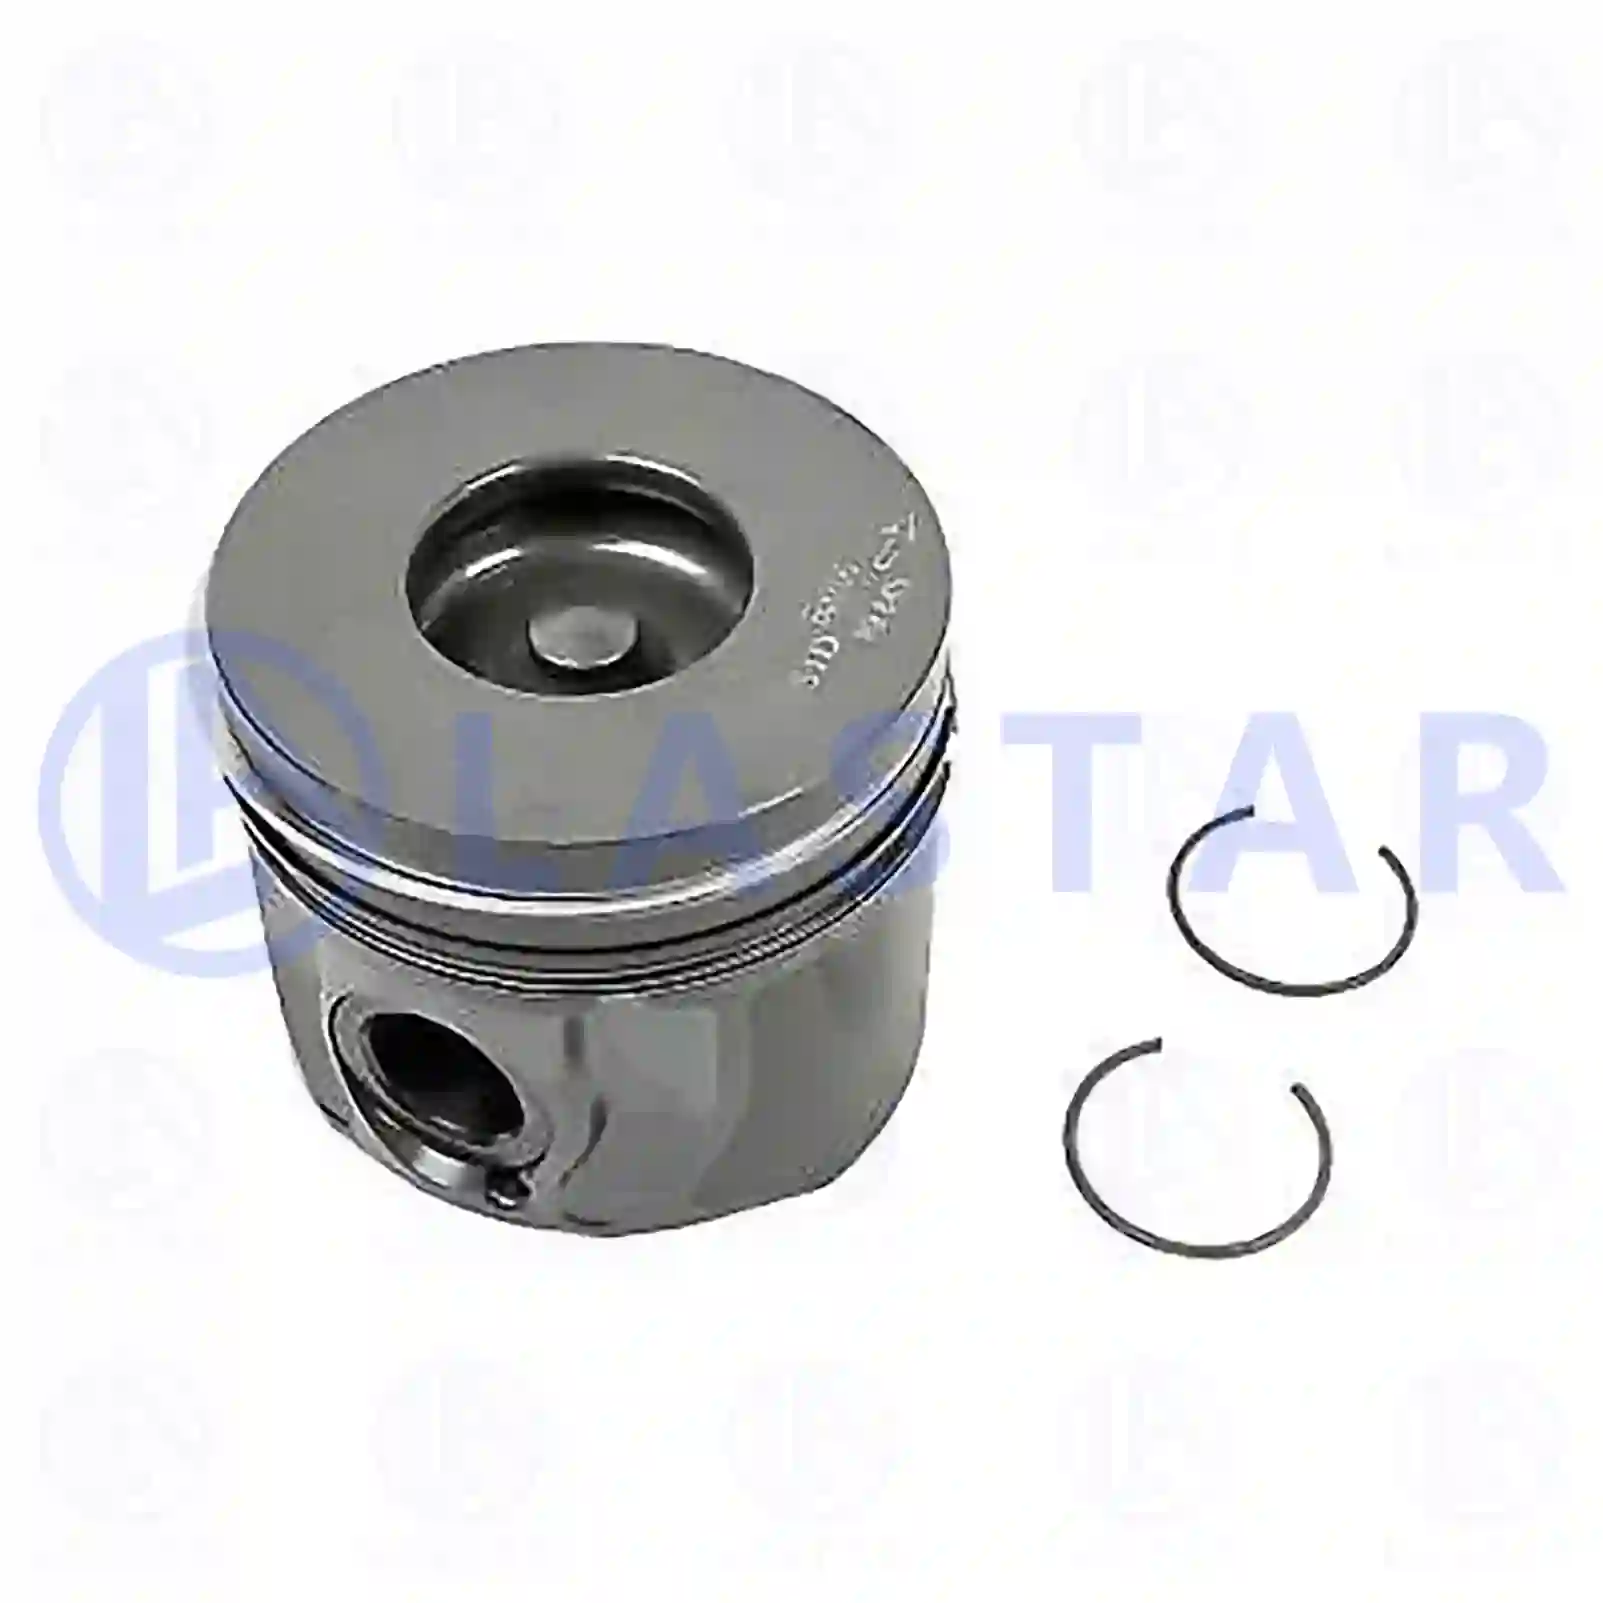 Piston, complete with rings, 77700676, 1369684, 1369689, 3C1Q-6K100-BAD, 3C1Q-6K100-BCD ||  77700676 Lastar Spare Part | Truck Spare Parts, Auotomotive Spare Parts Piston, complete with rings, 77700676, 1369684, 1369689, 3C1Q-6K100-BAD, 3C1Q-6K100-BCD ||  77700676 Lastar Spare Part | Truck Spare Parts, Auotomotive Spare Parts